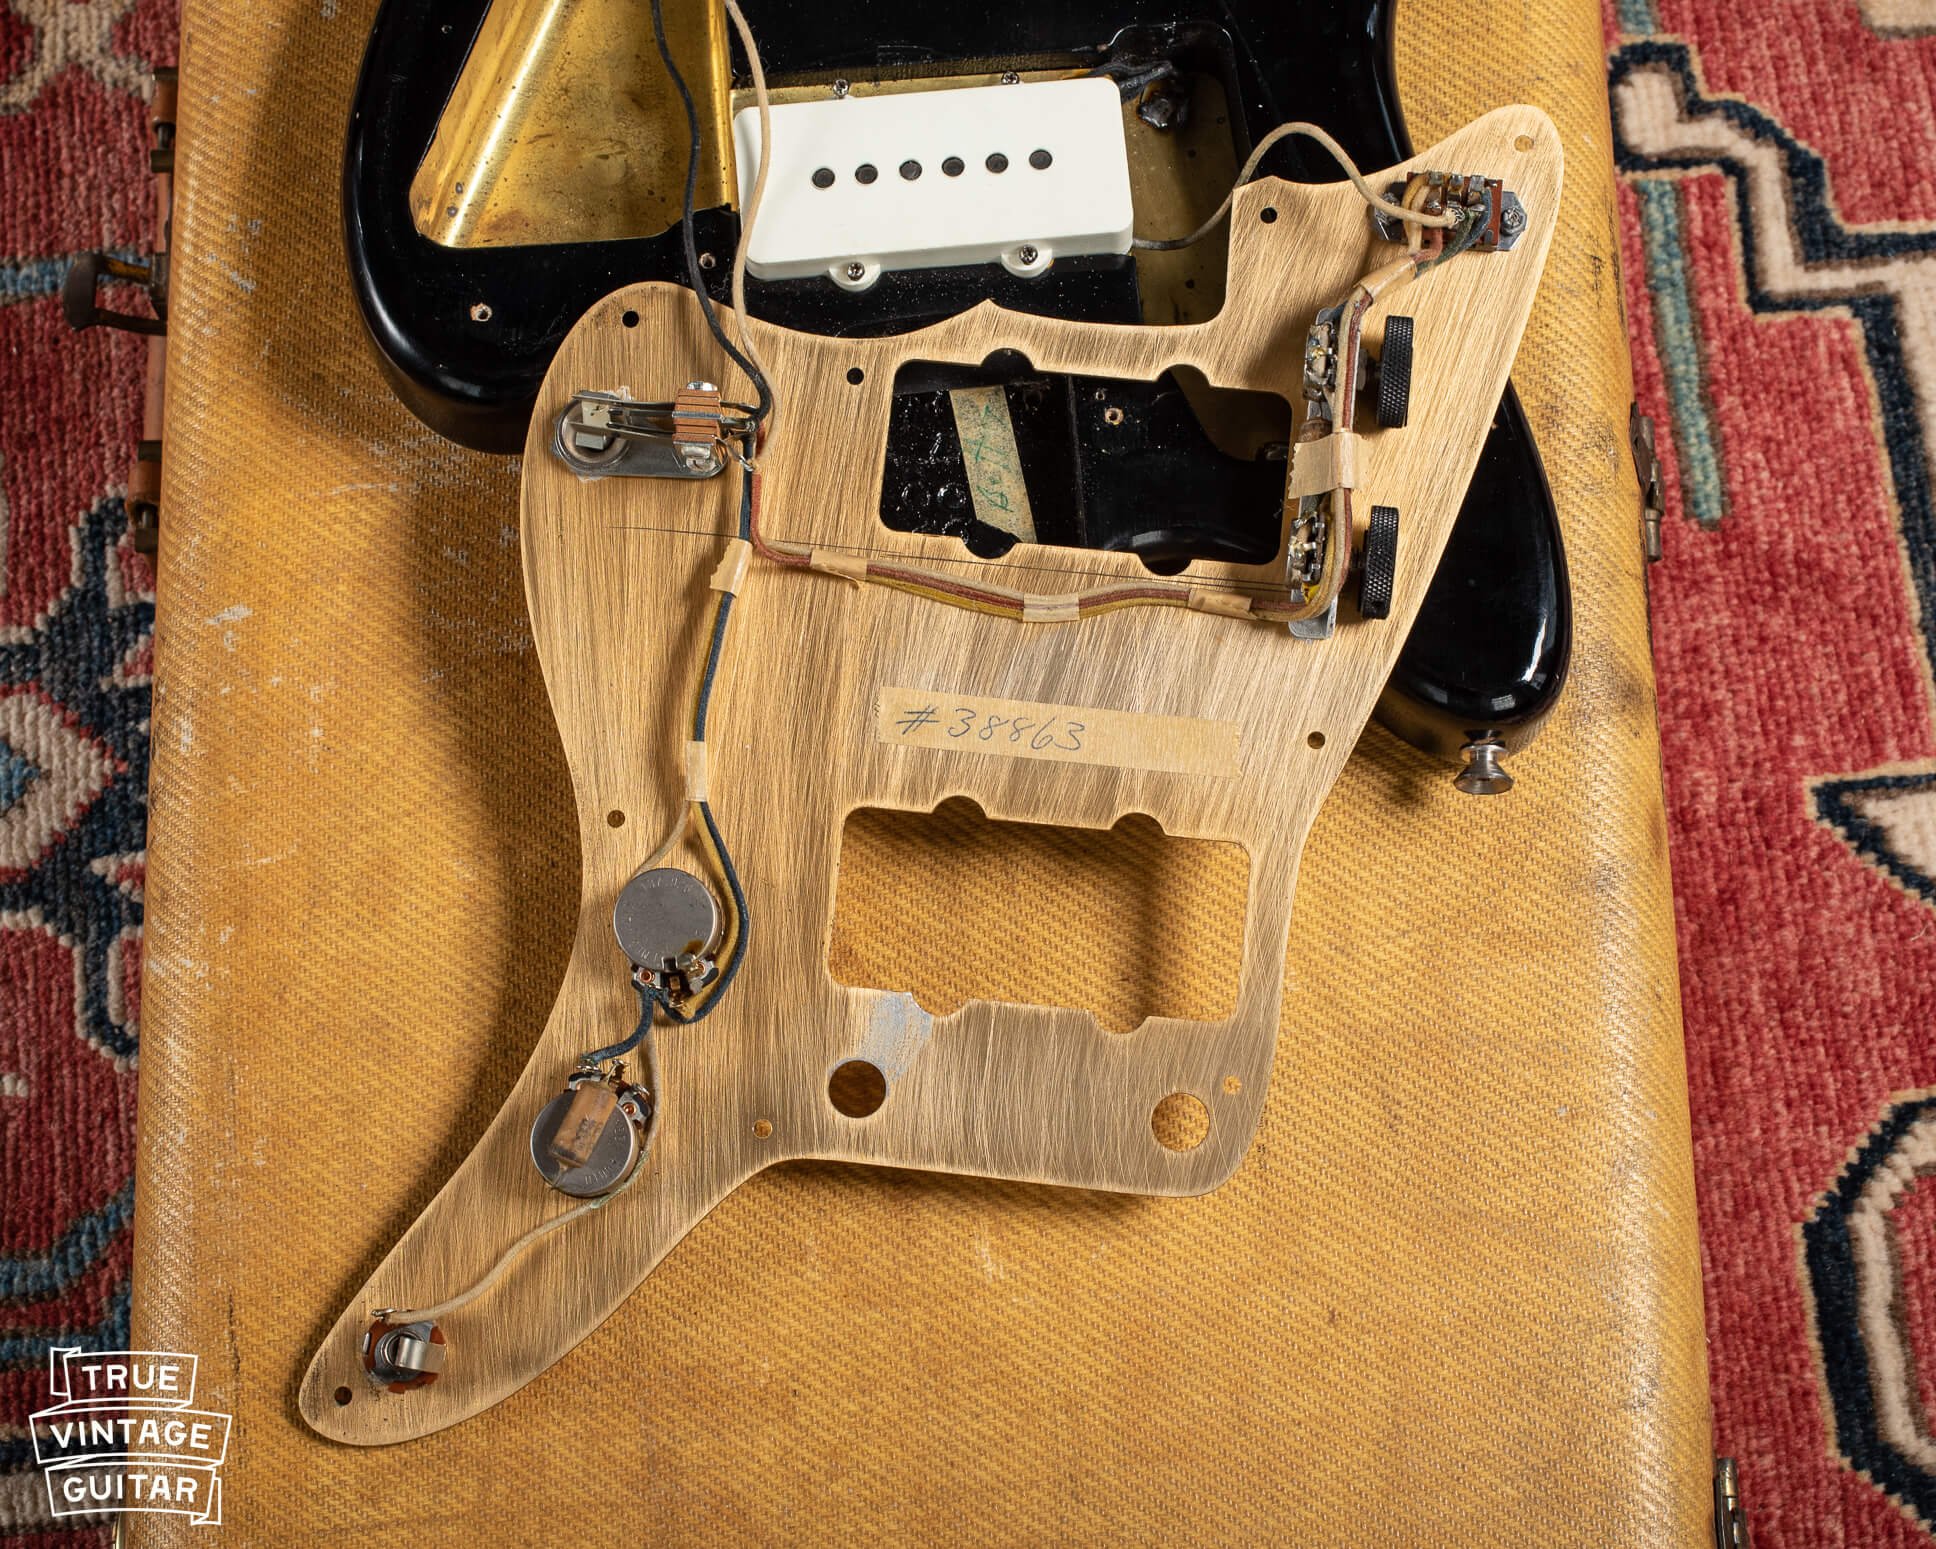 Gold anodized pickguard on a 1959 Fender Jazzmaster